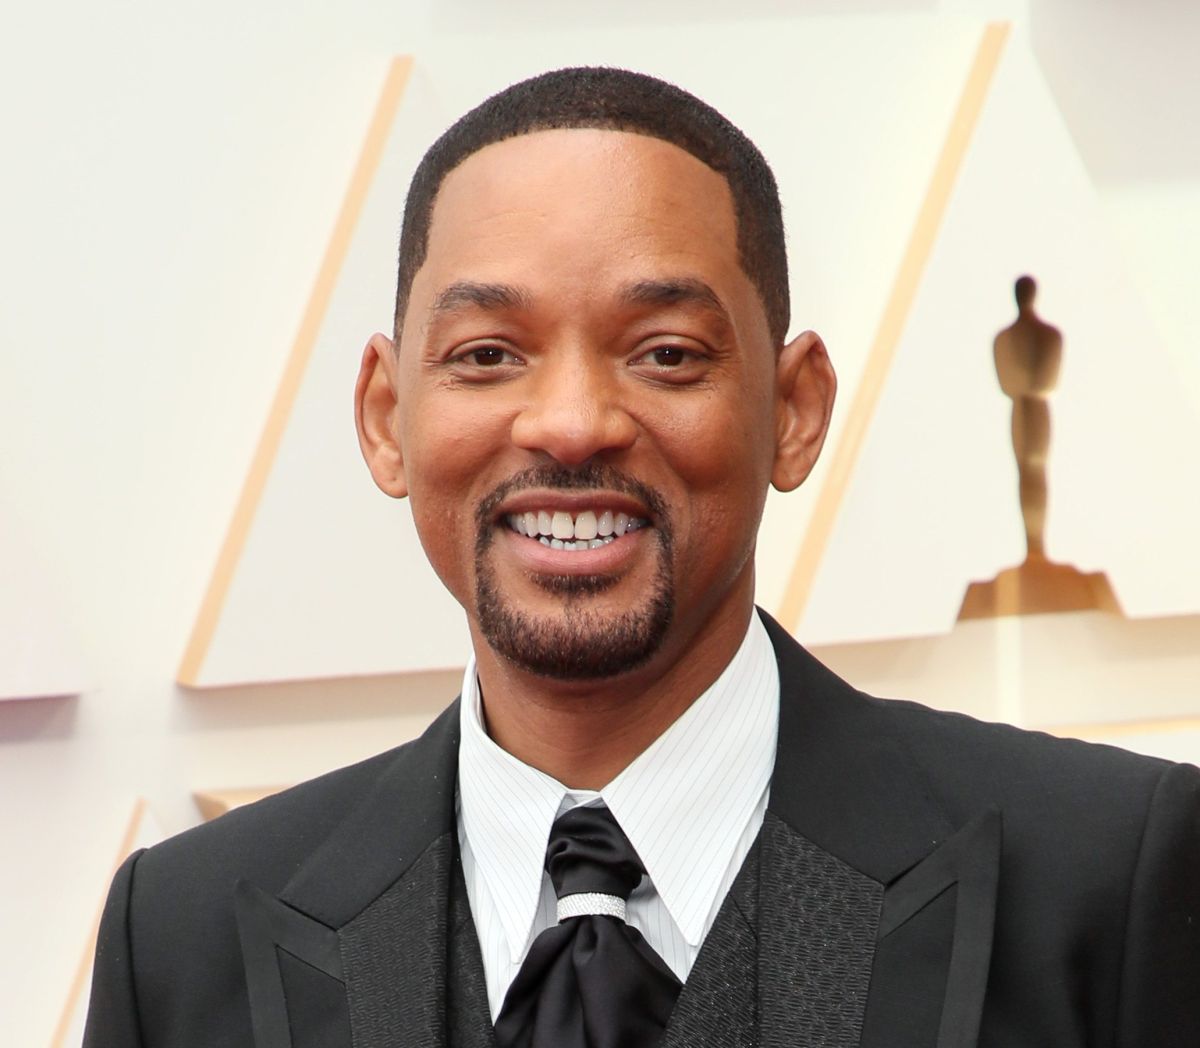 Will Smith makes his official return to work after the 2022 Oscars scandal